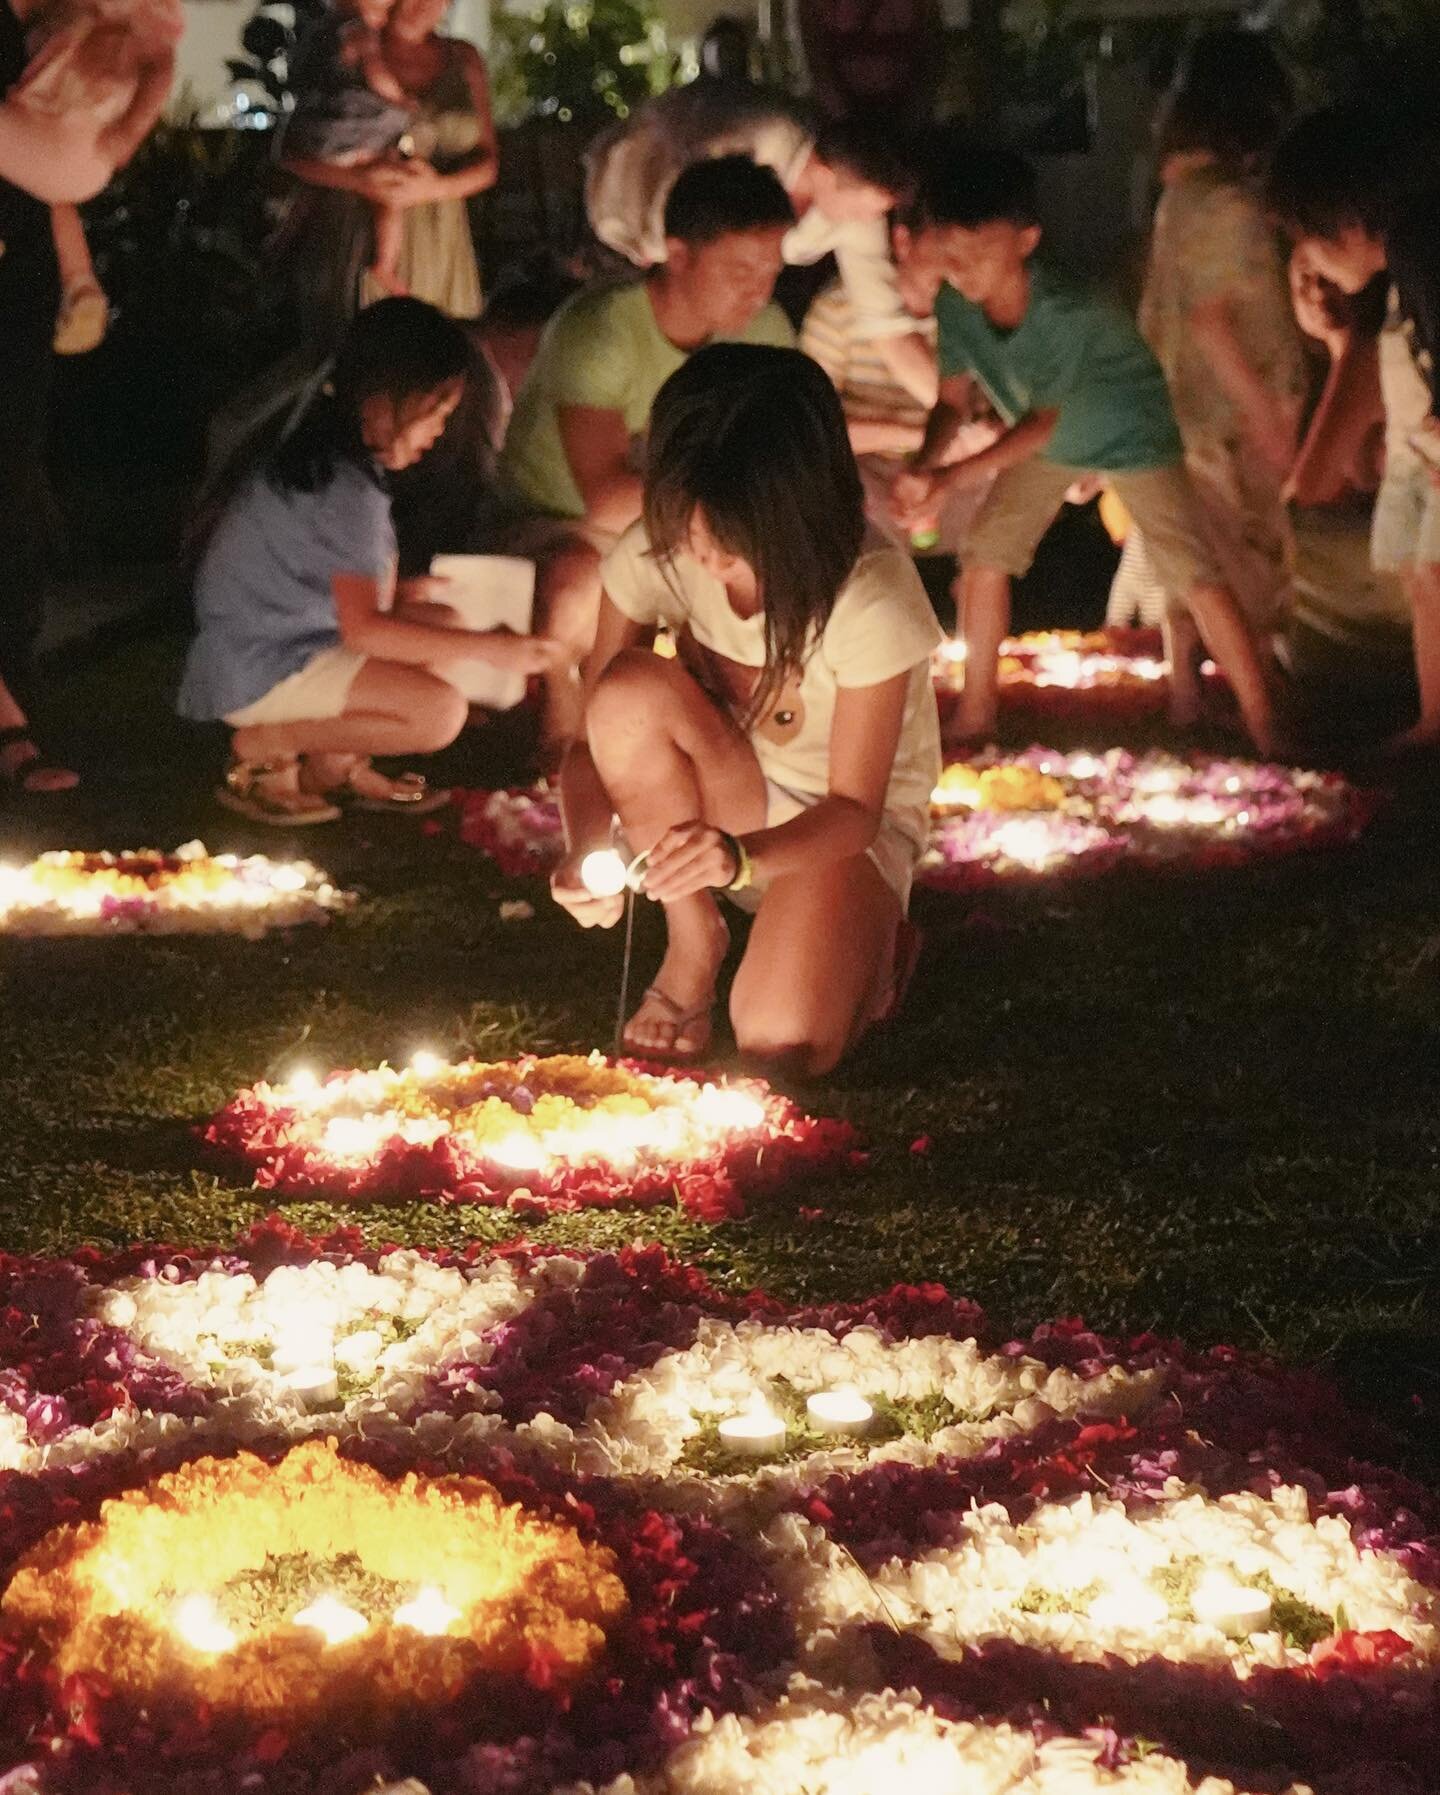 A moment of togetherness and sustainability 🕯️🌿 Our guests joined in lighting up candles on the beautiful mandala creation during Susta Festa - Earth Hour celebration at Mana Earthly Paradise